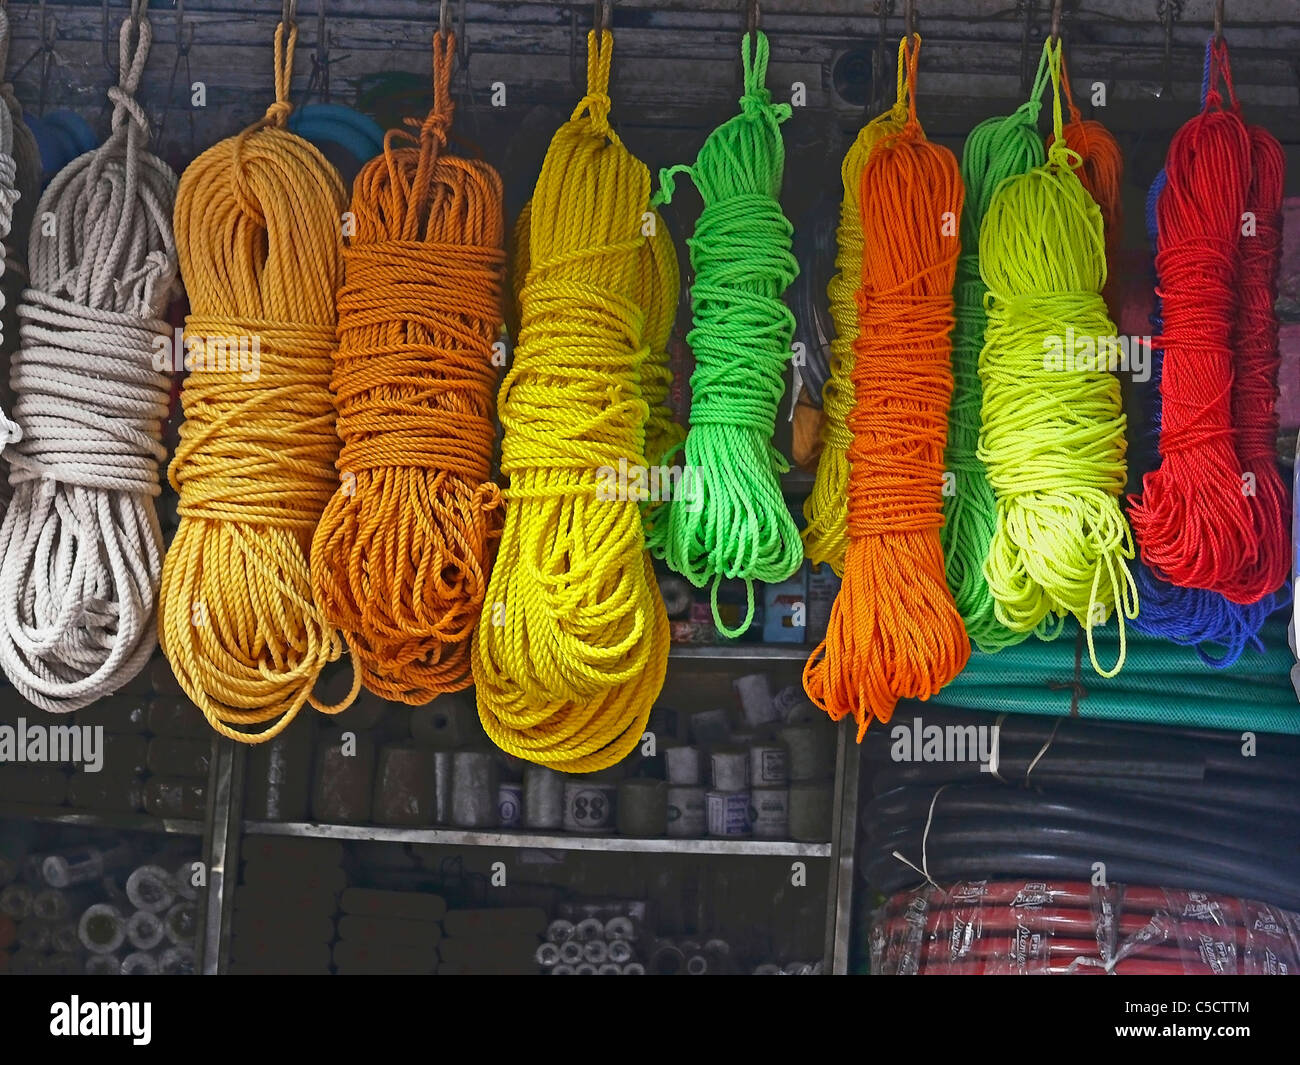 Bundles of Nylon heavy-duty commercial quality rope are displayed outside a  shop for sell, India Stock Photo - Alamy